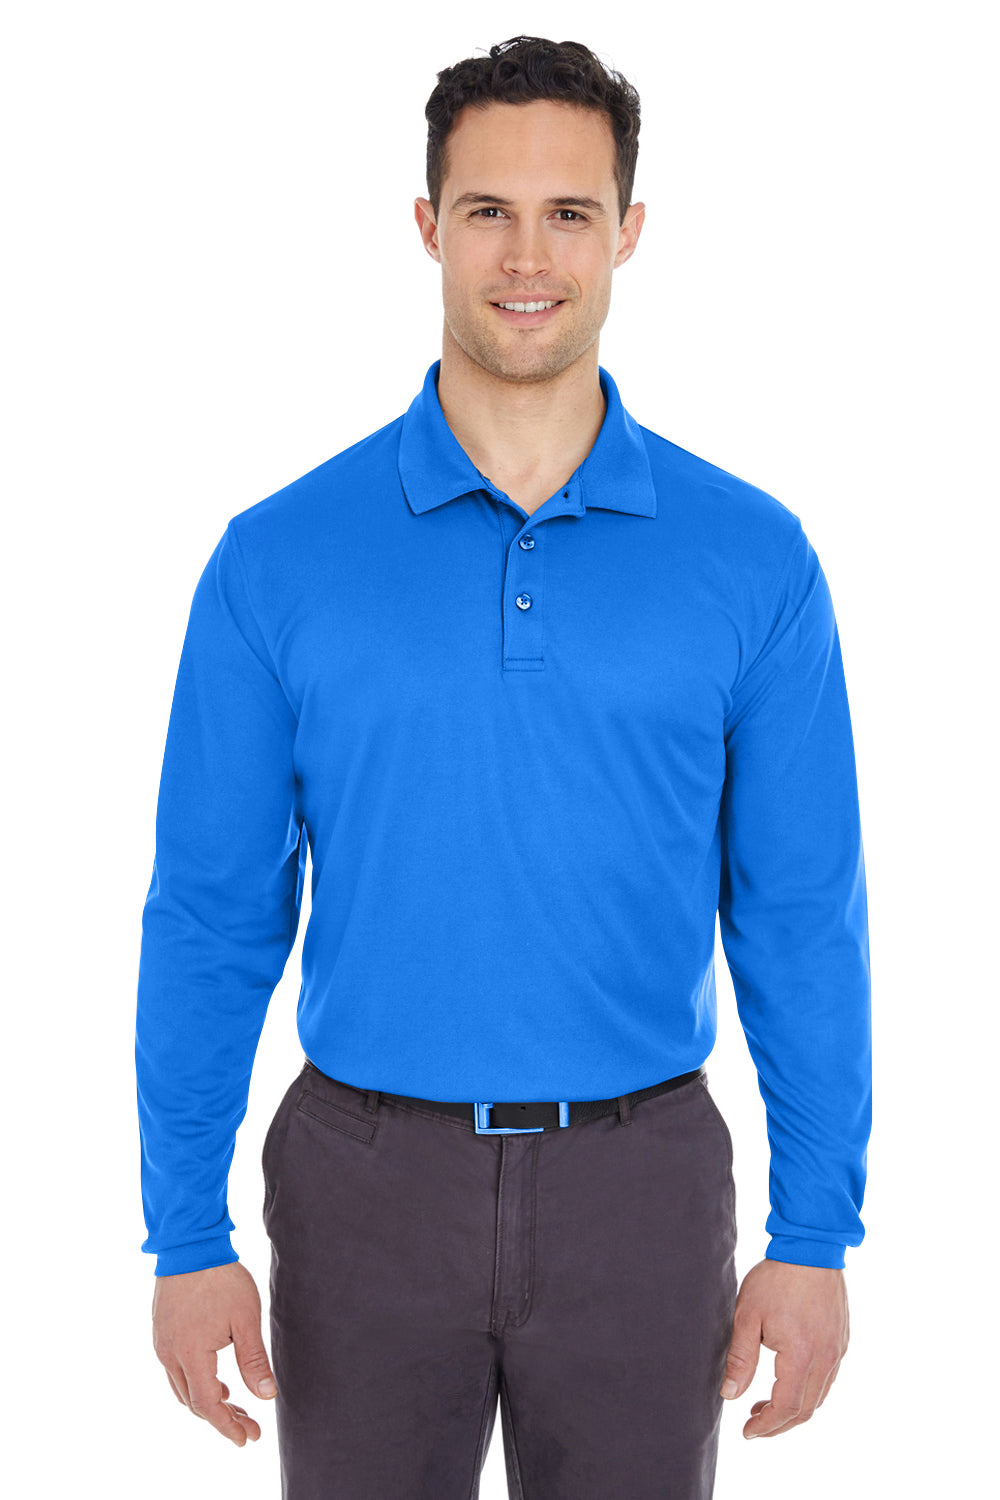 UltraClub 8210LS Mens Cool & Dry Moisture Wicking Long Sleeve Polo Shirt Royal Blue Front